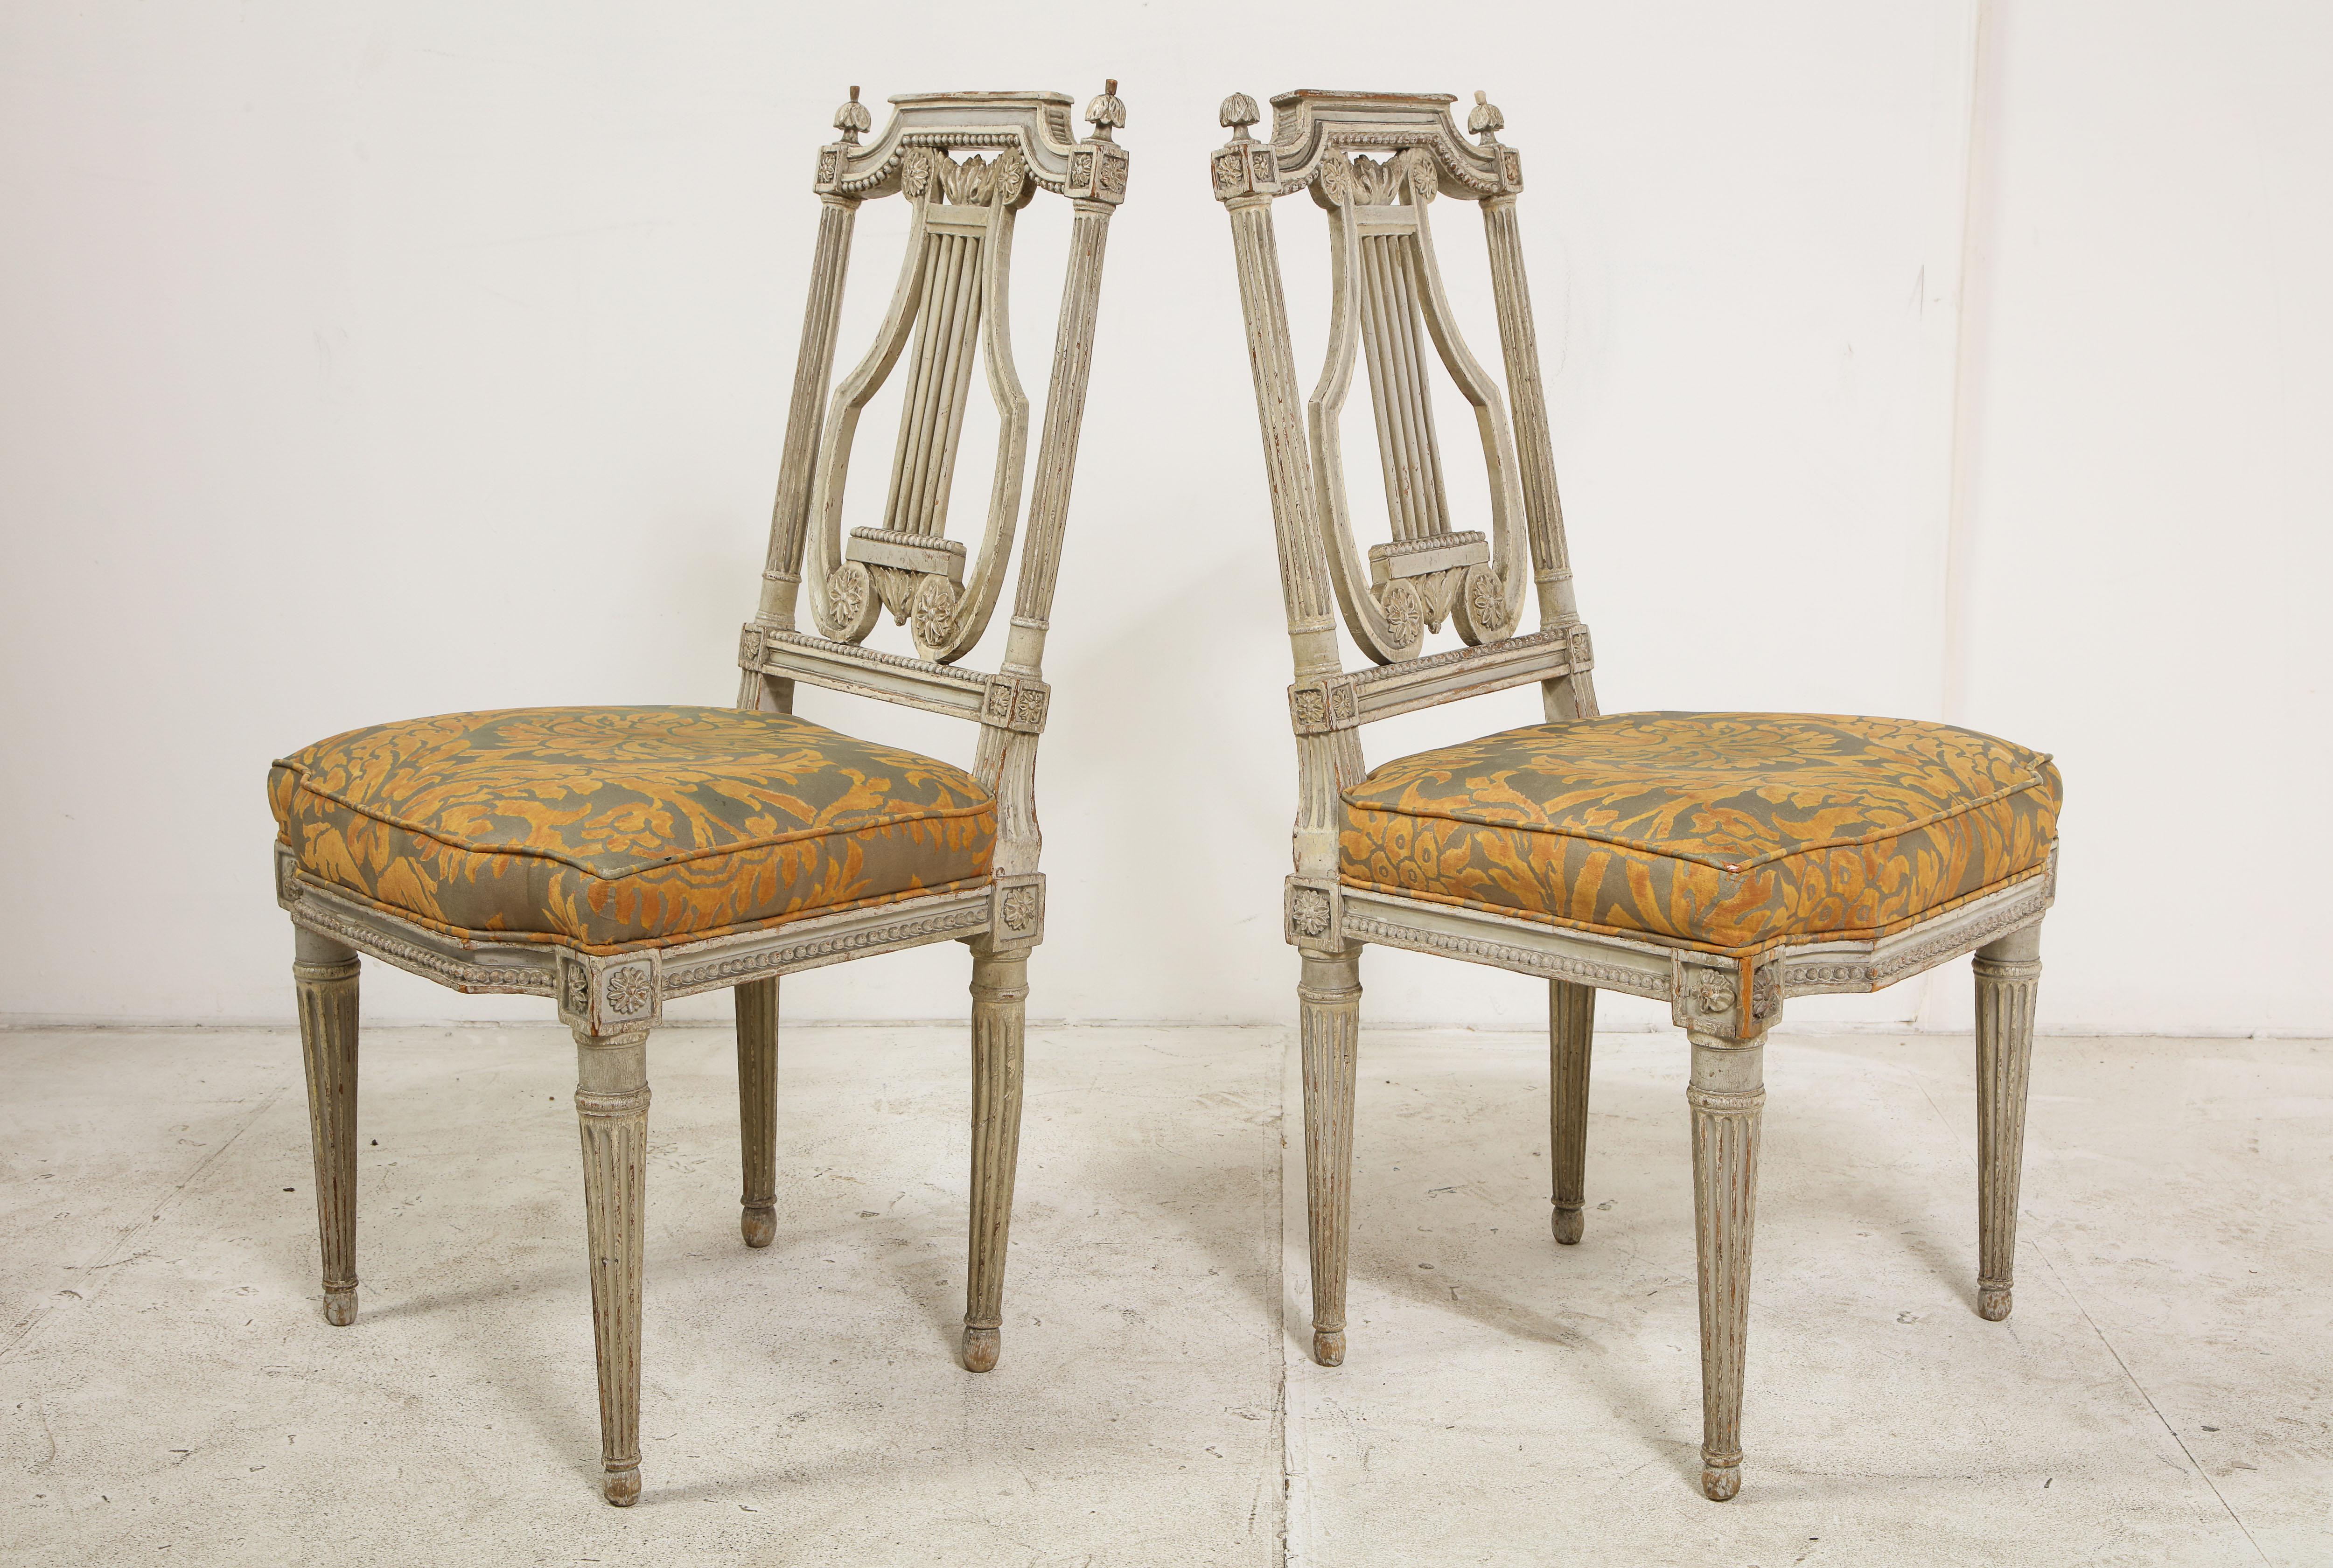 Pair of 19th Century Italian Painted Lyre-Back Chairs with Fortuny Seat Cushions 13